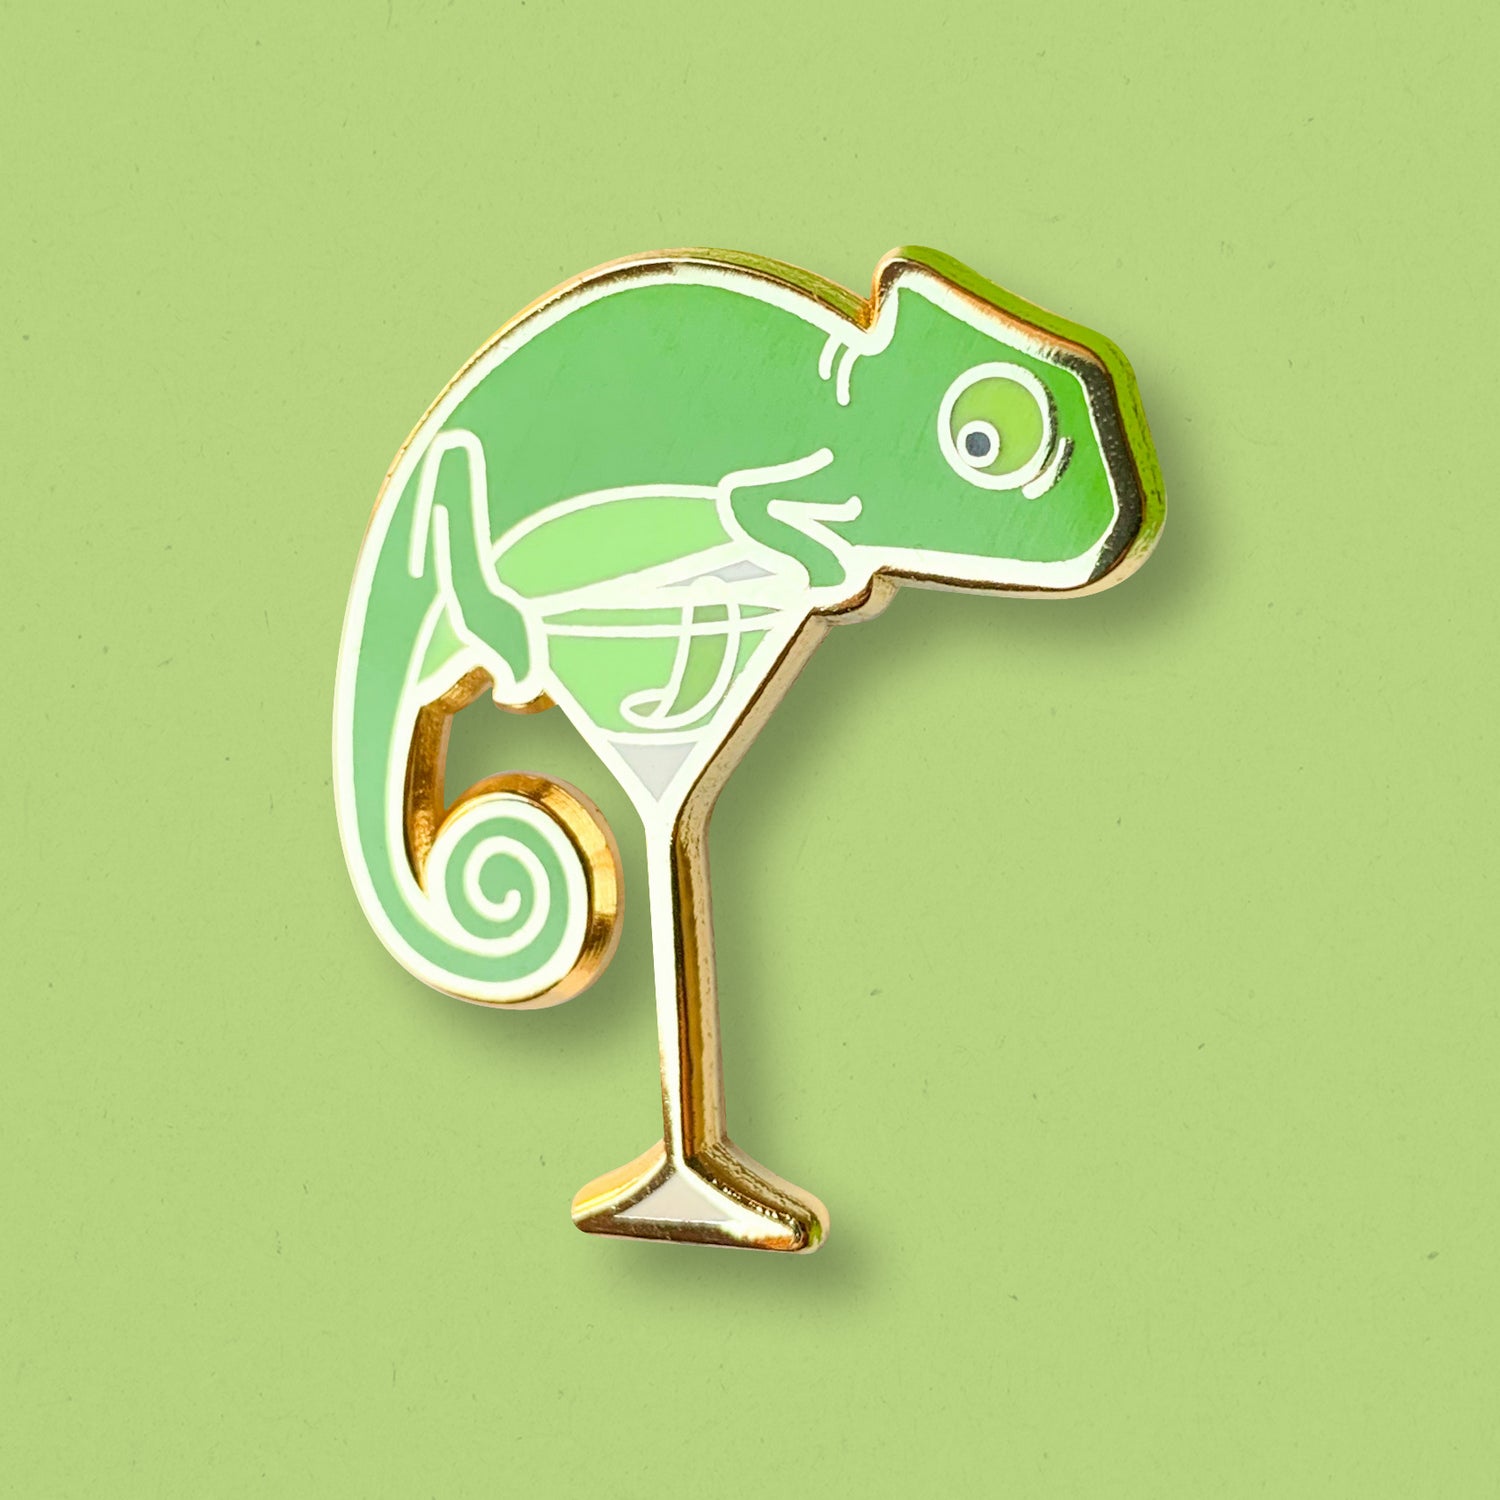 Chameleon & Last Word Cocktail Hard Enamel Pin by Cocktail Critters